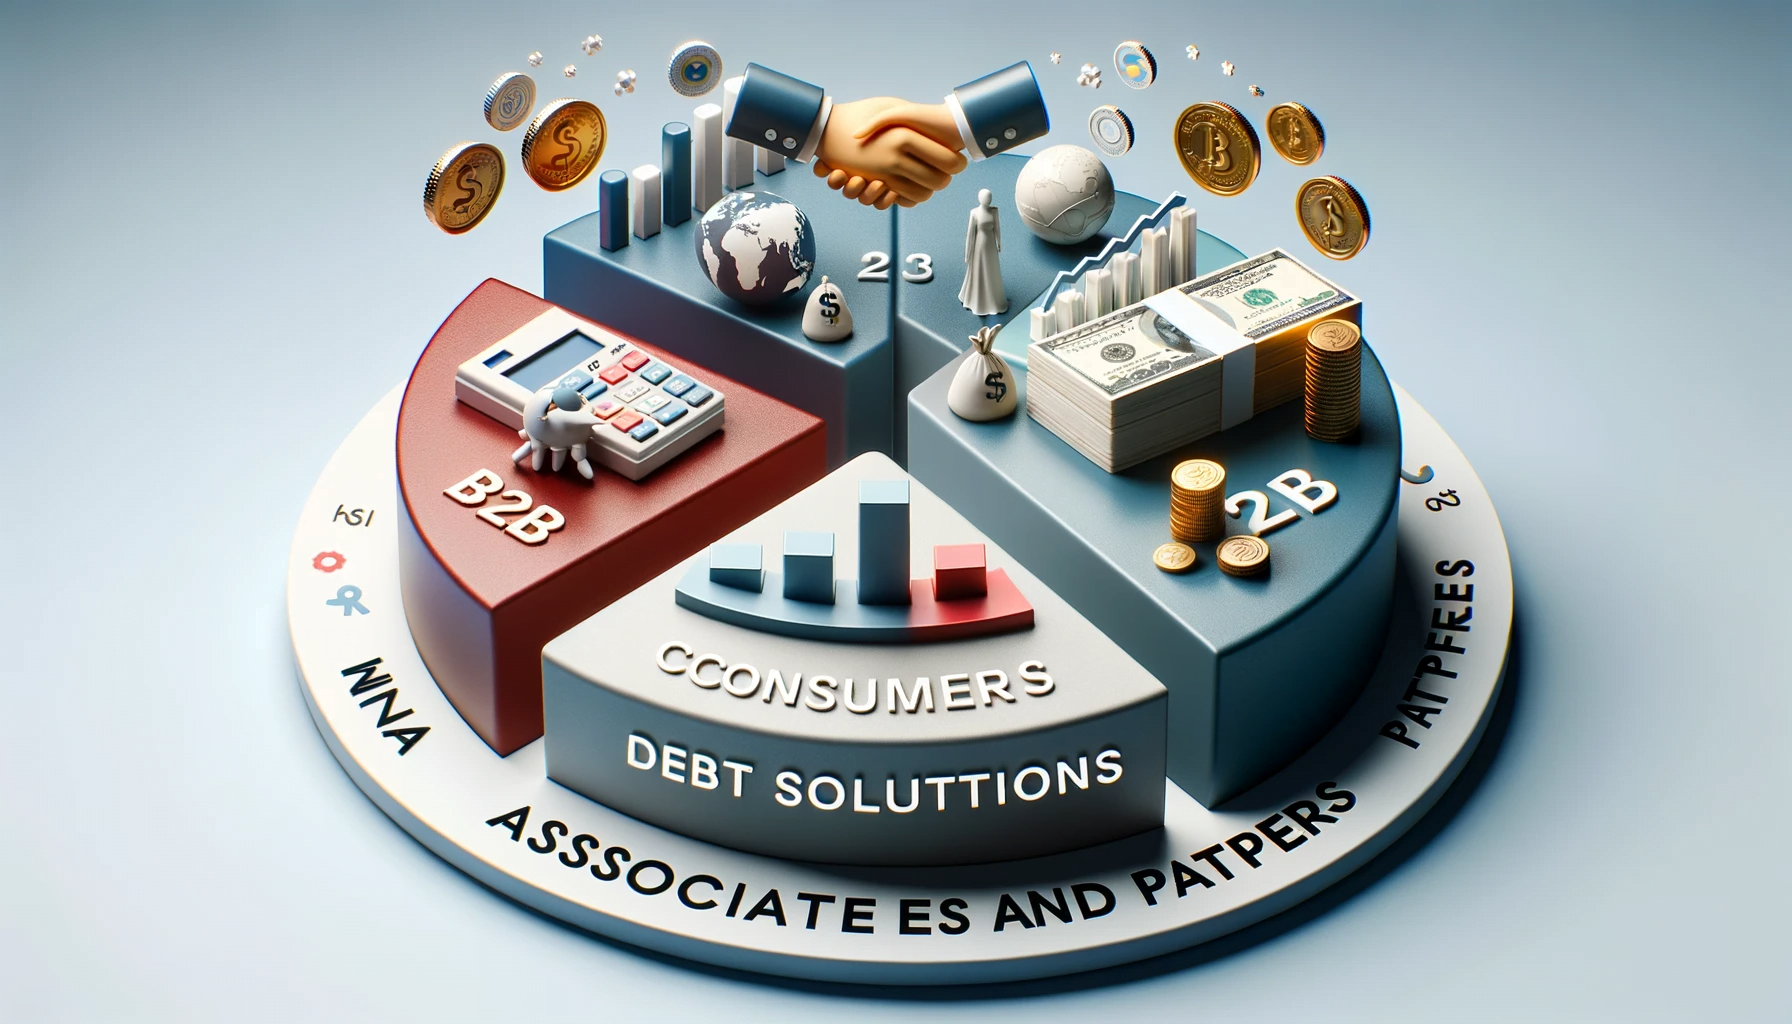 Mena Associates and Partners 3D Pie Chart for B2B and Consumer Debt Solutions